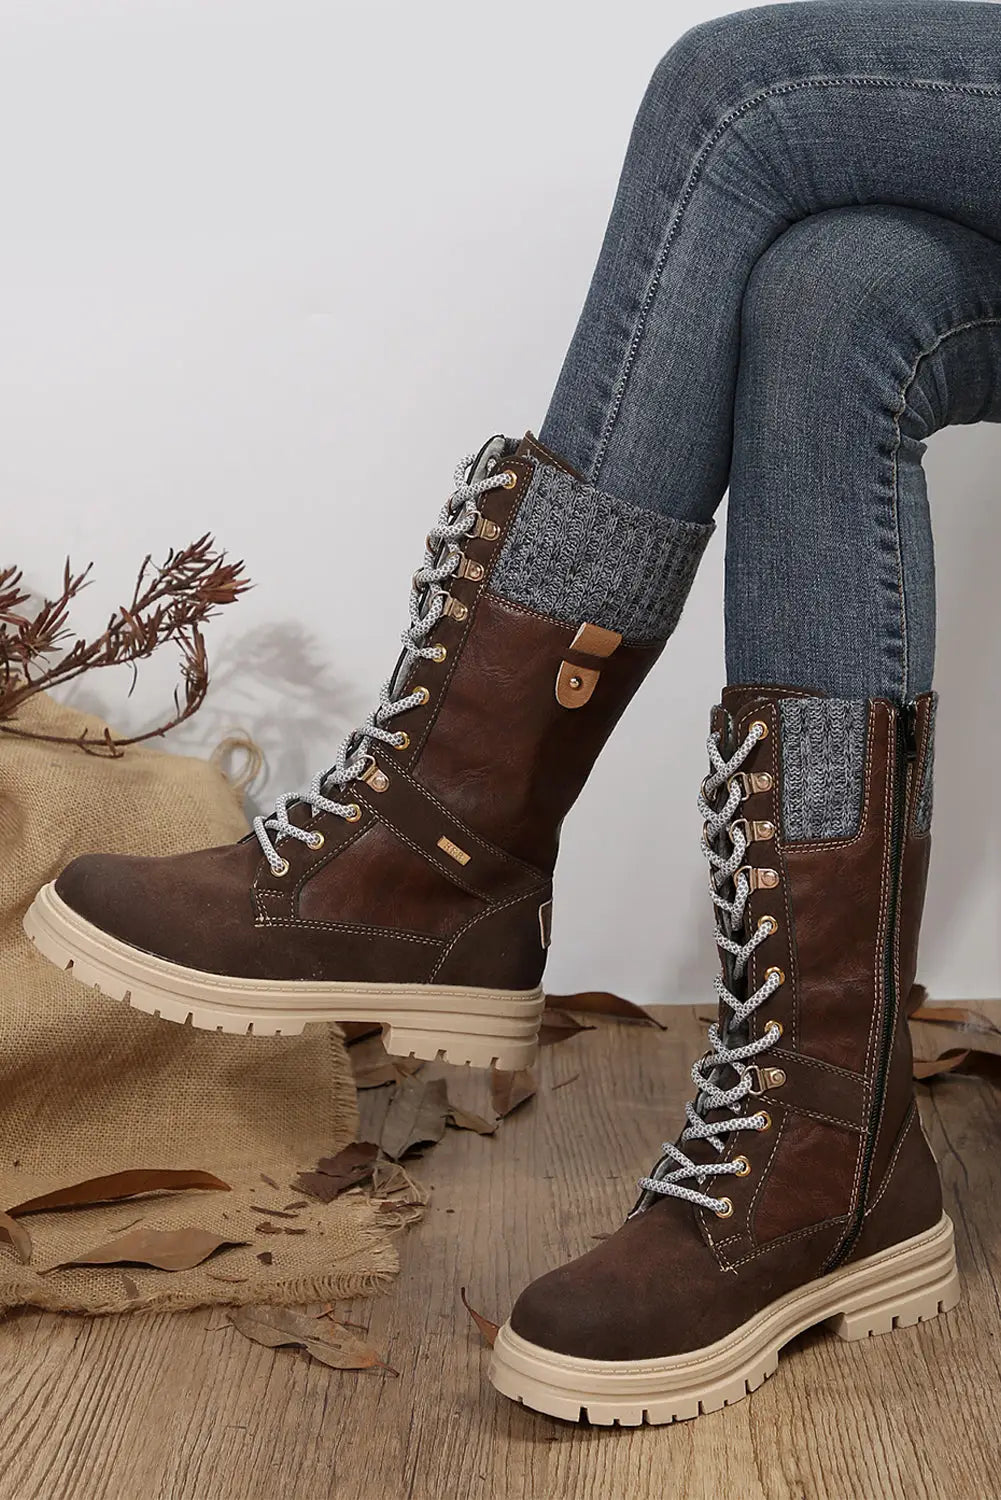 Coffee wool knit patchwork lace up leather boots - 37 /